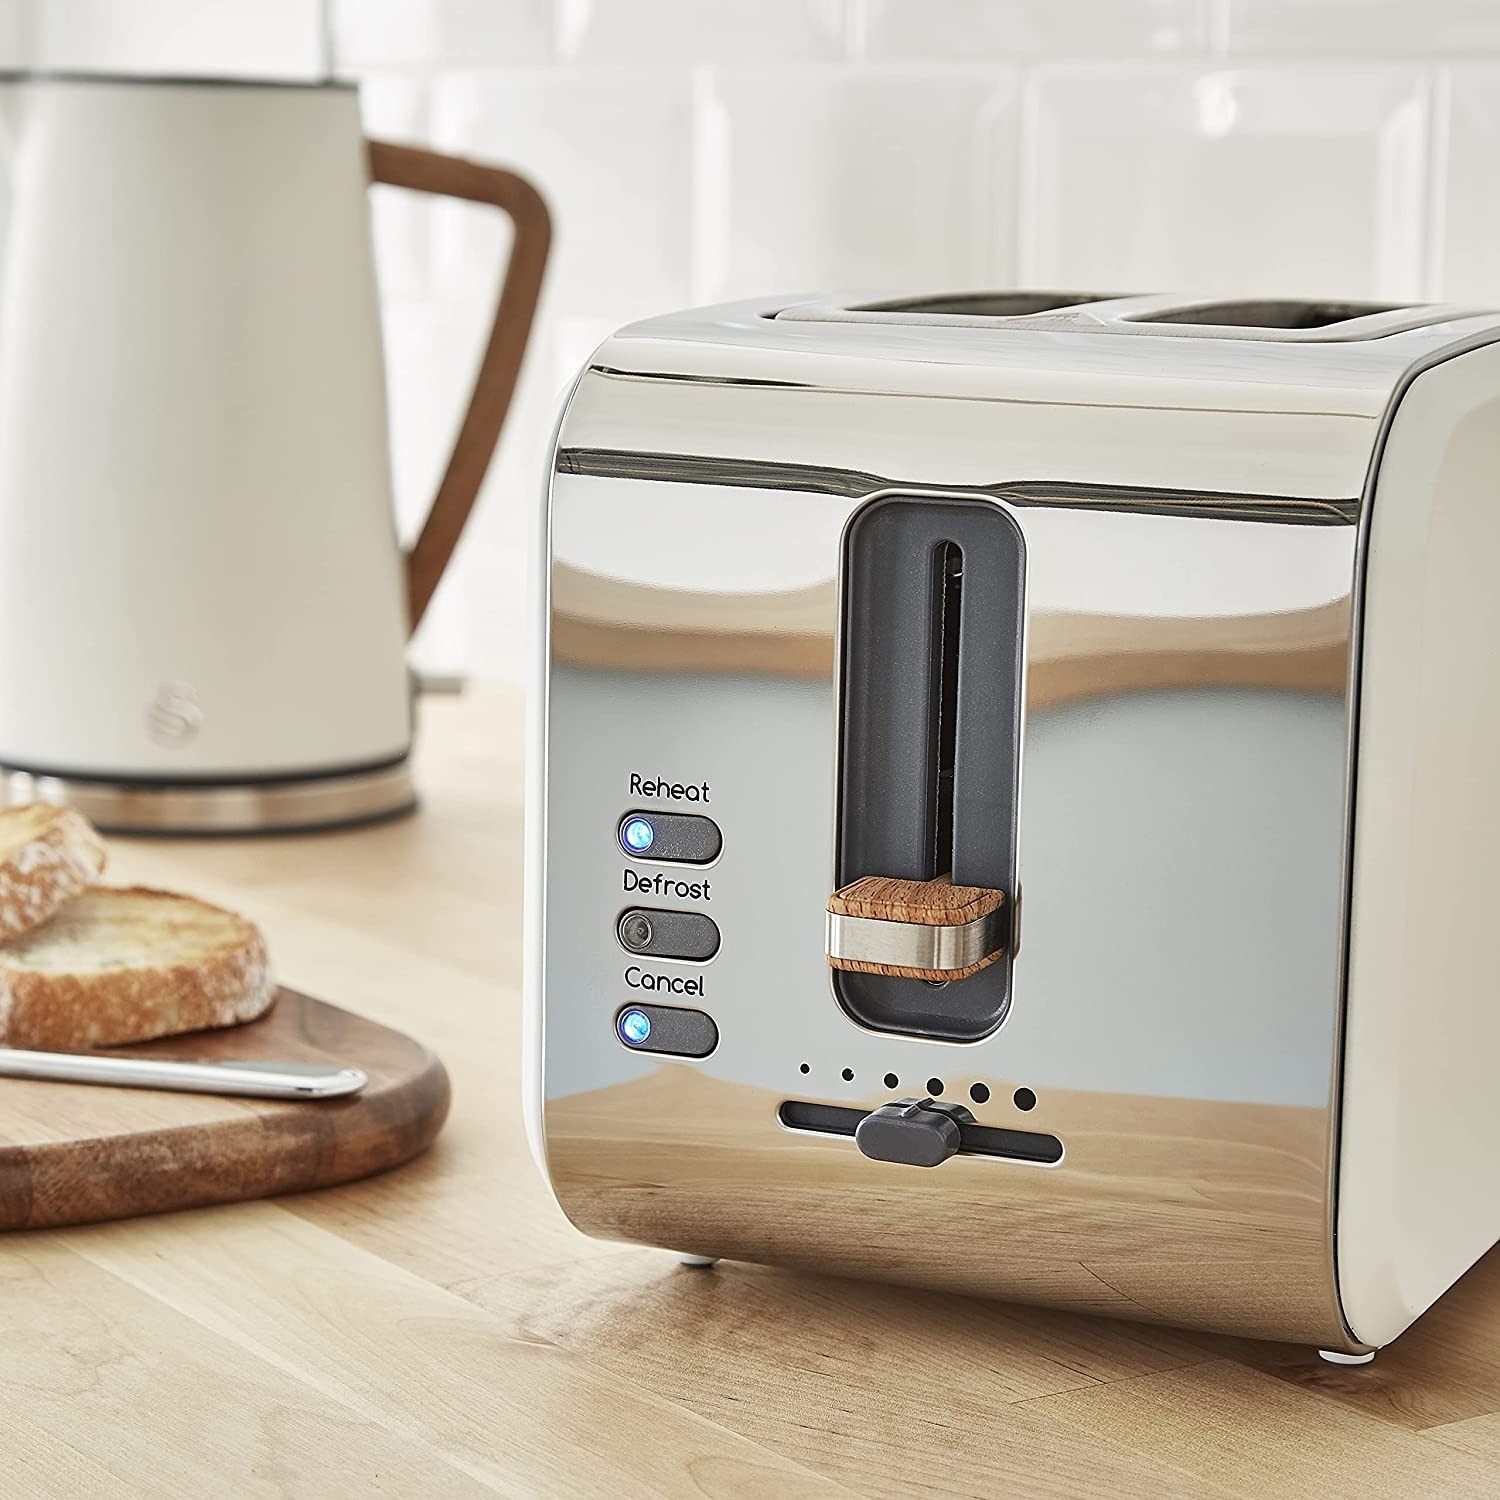 https://ak1.ostkcdn.com/images/products/is/images/direct/5ad9f39540cd0362adbb4bd80013178be0632142/Salton%C2%A0-Nordic-Toaster-2-Slice%2C-3-Modes-with-6-Power-Settings%2C-Slim-Scandinavian-Design-Runs-on-900-Watts%2C-Matte-Cotton-White.jpg